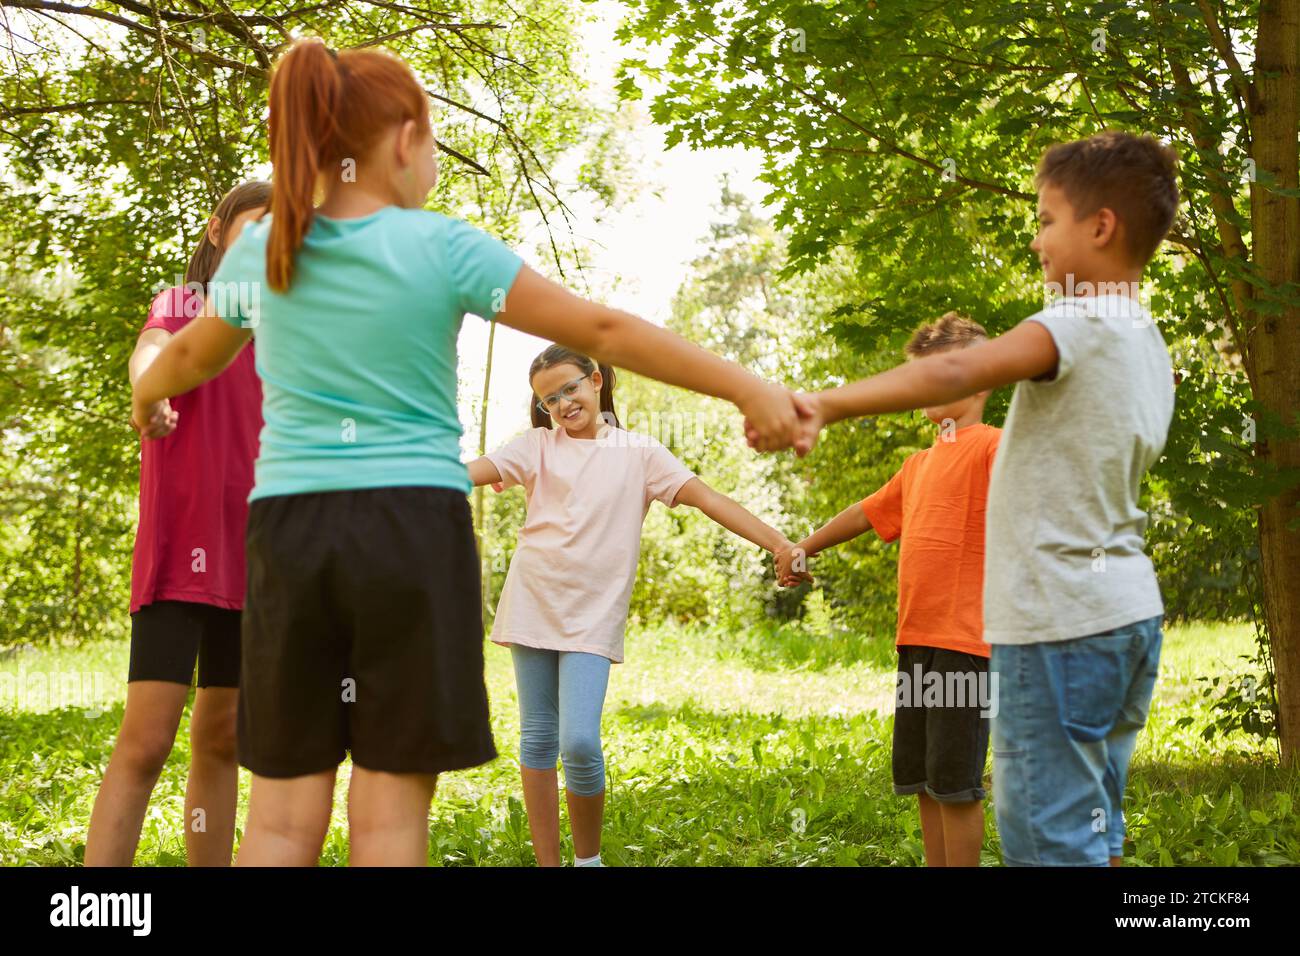 Friends holding hands while playing ring-around-the-rosy at park Stock Photo